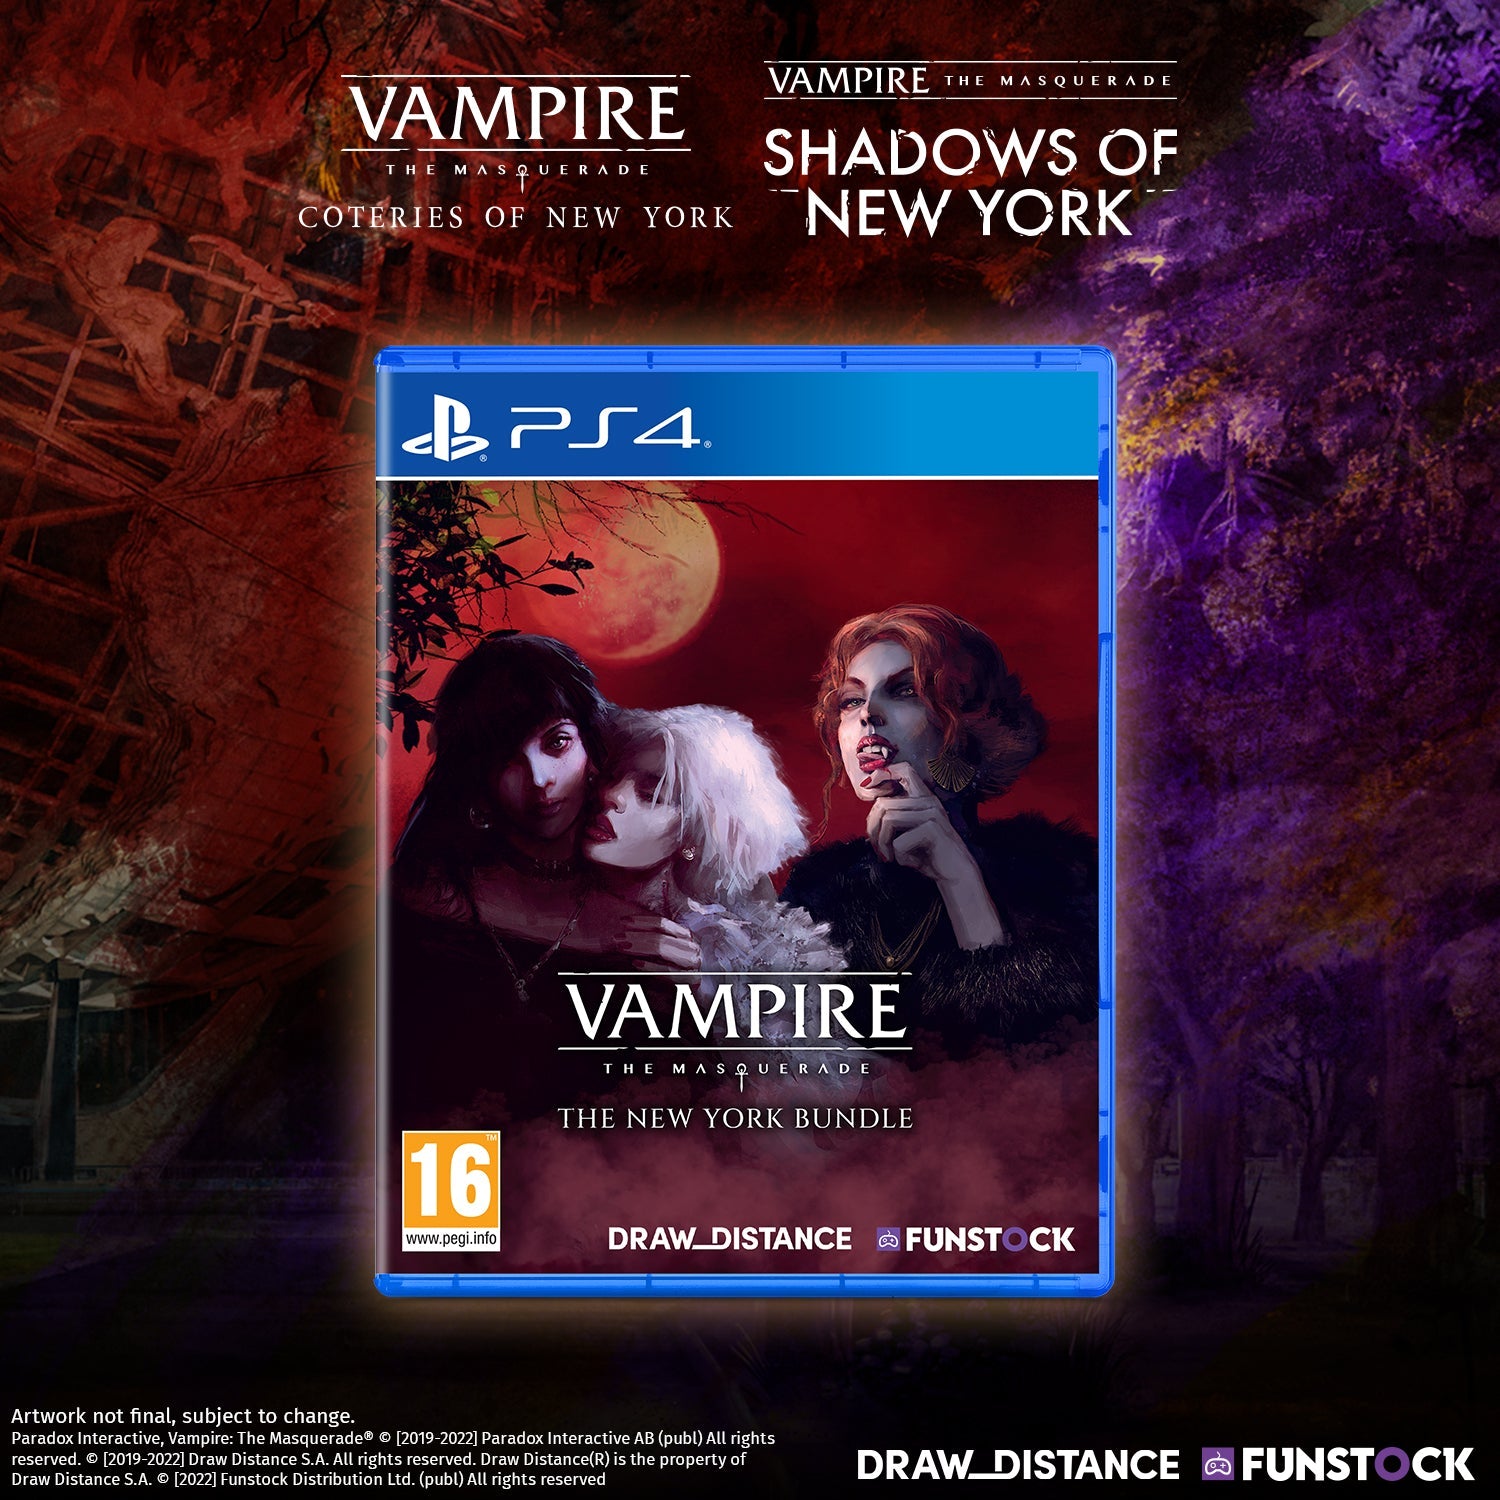 Vampire: The Masquerade - Shadows of New York review: Final death